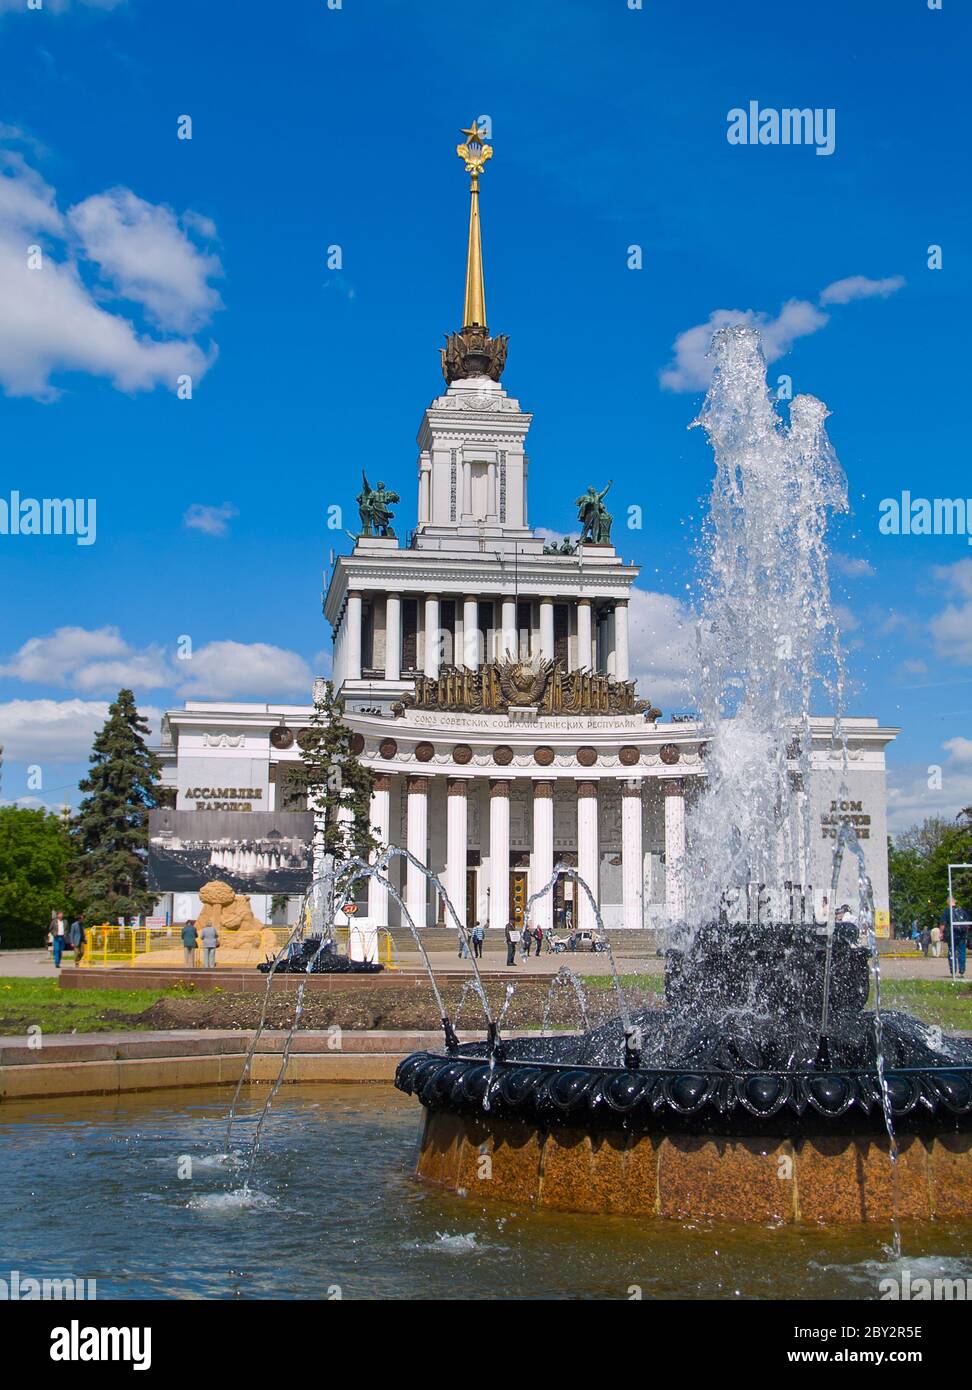 VDNH, park and exibition center of Moscow, Russia Stock Photo